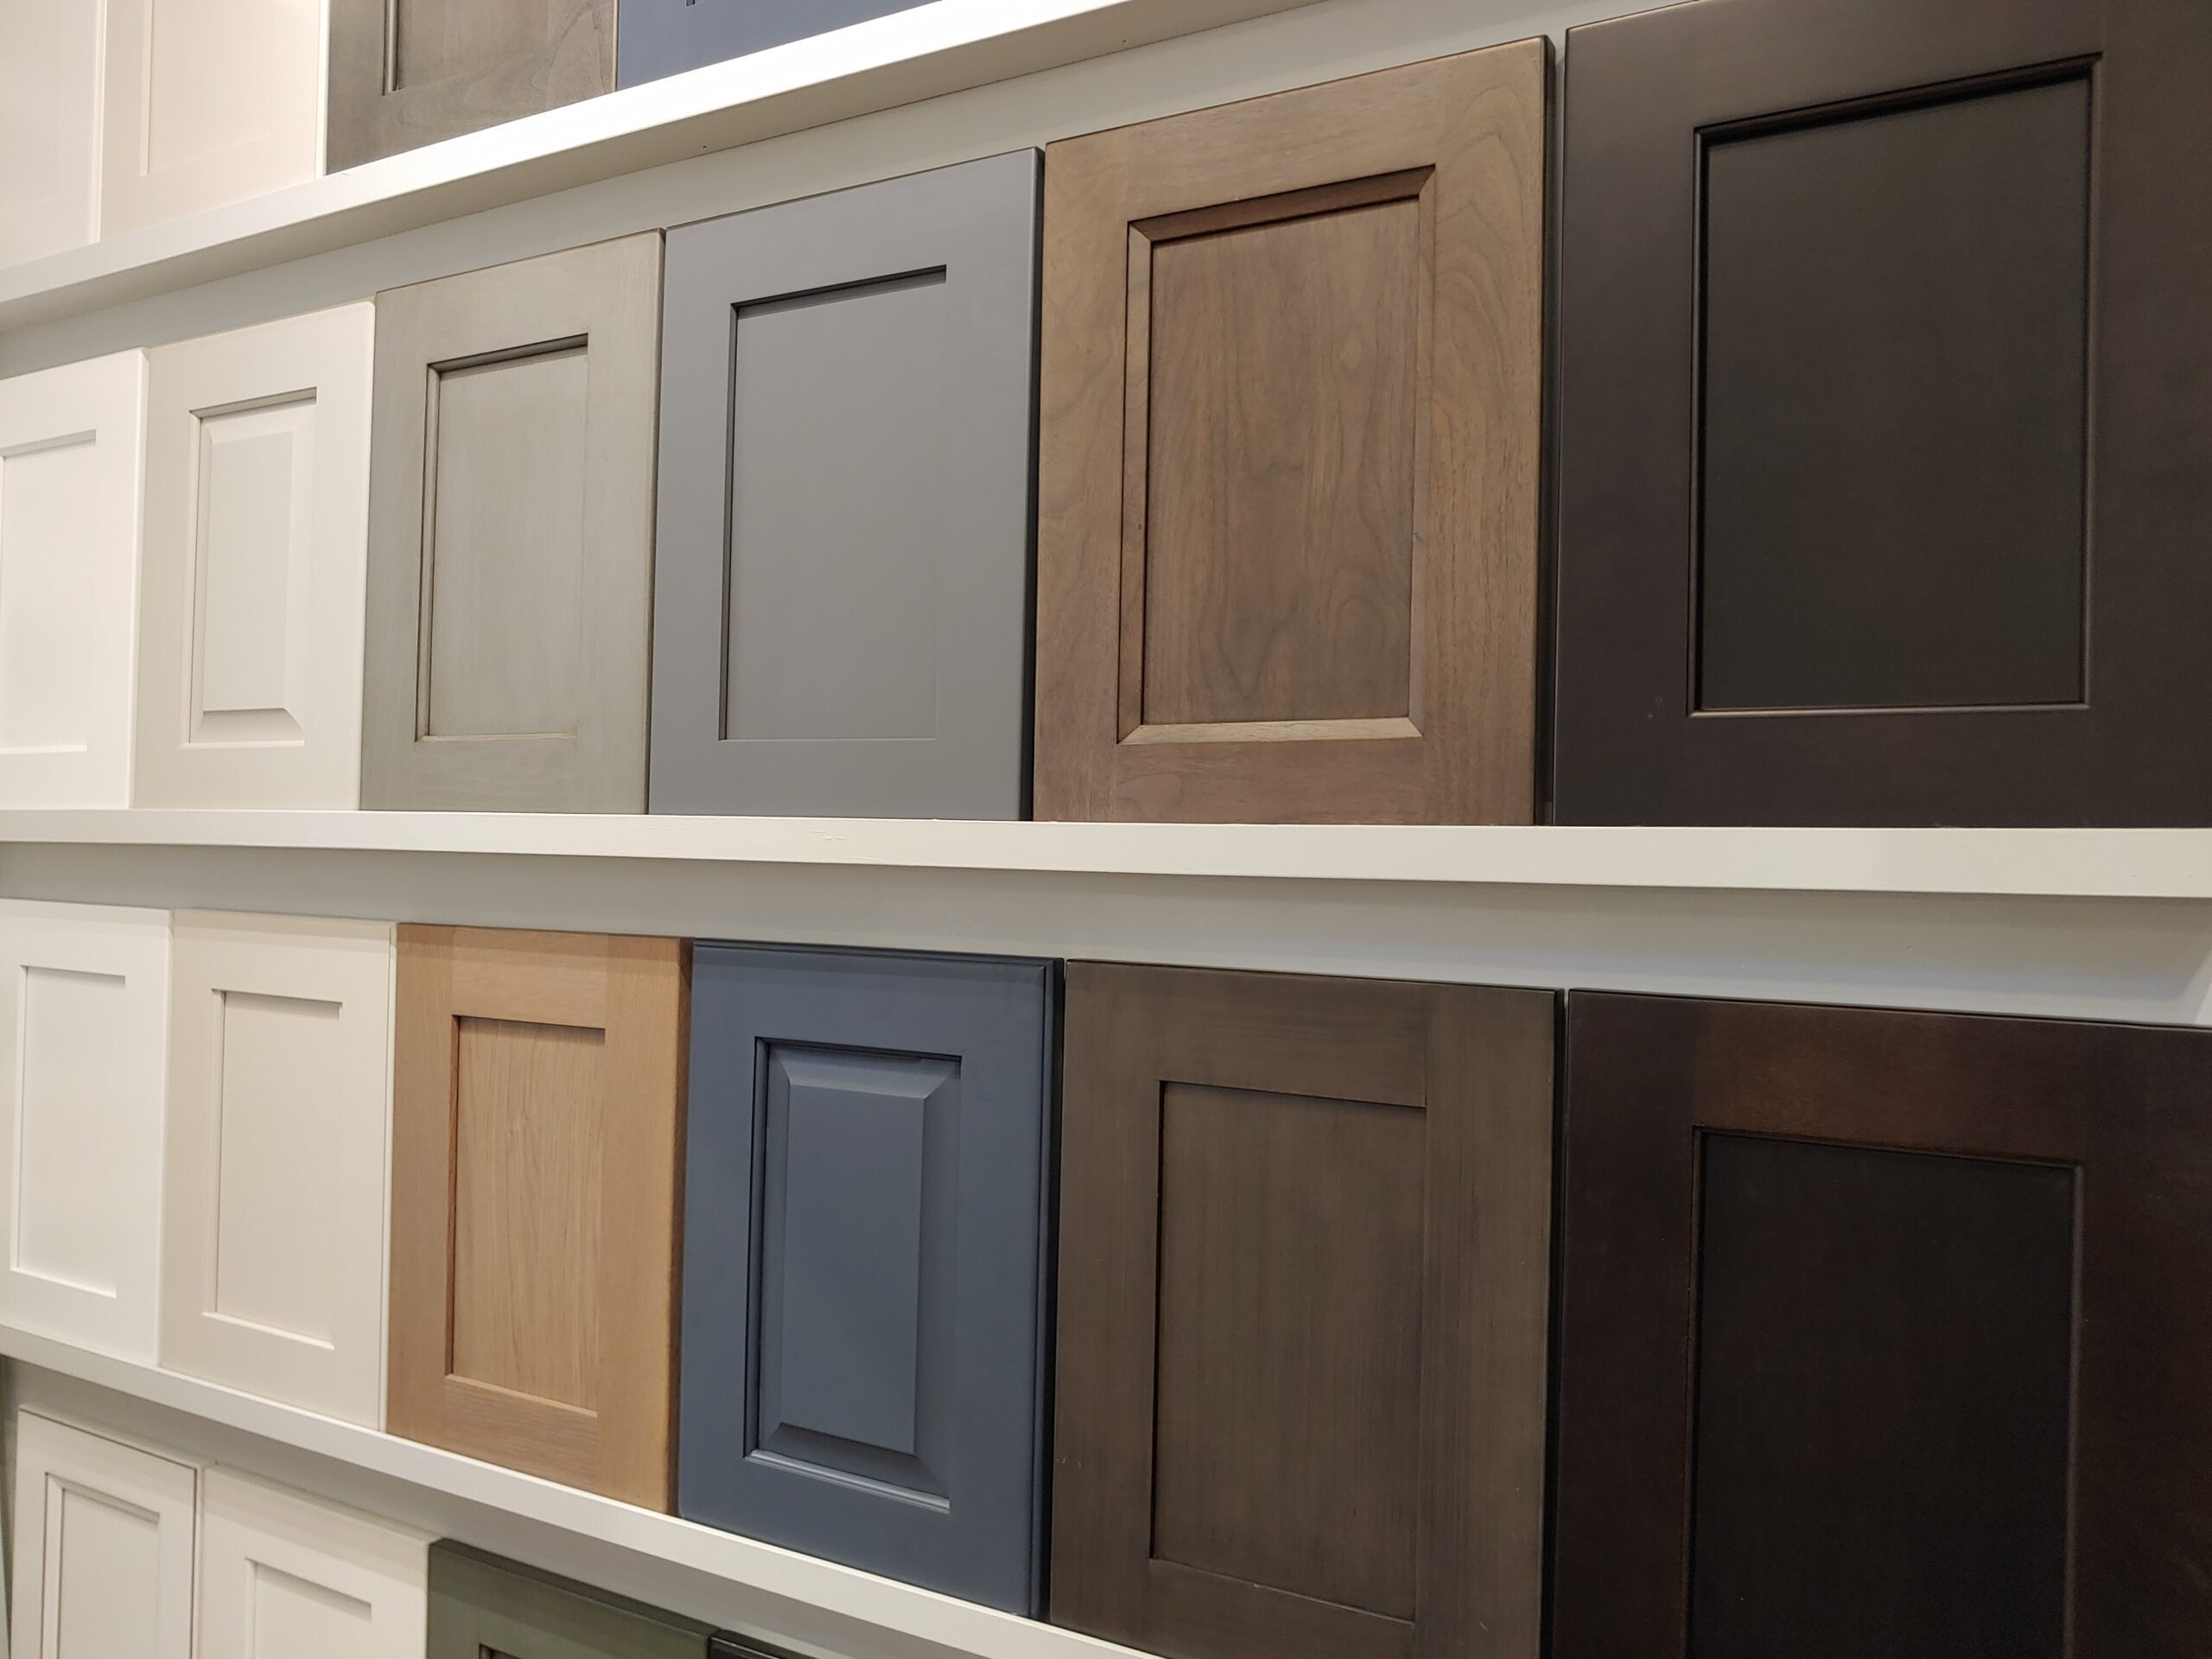 https://designerwest.ca/wp-content/uploads/2021/05/New-Wall-of-Cabinet-Doors-scaled-e1658595064789.jpg